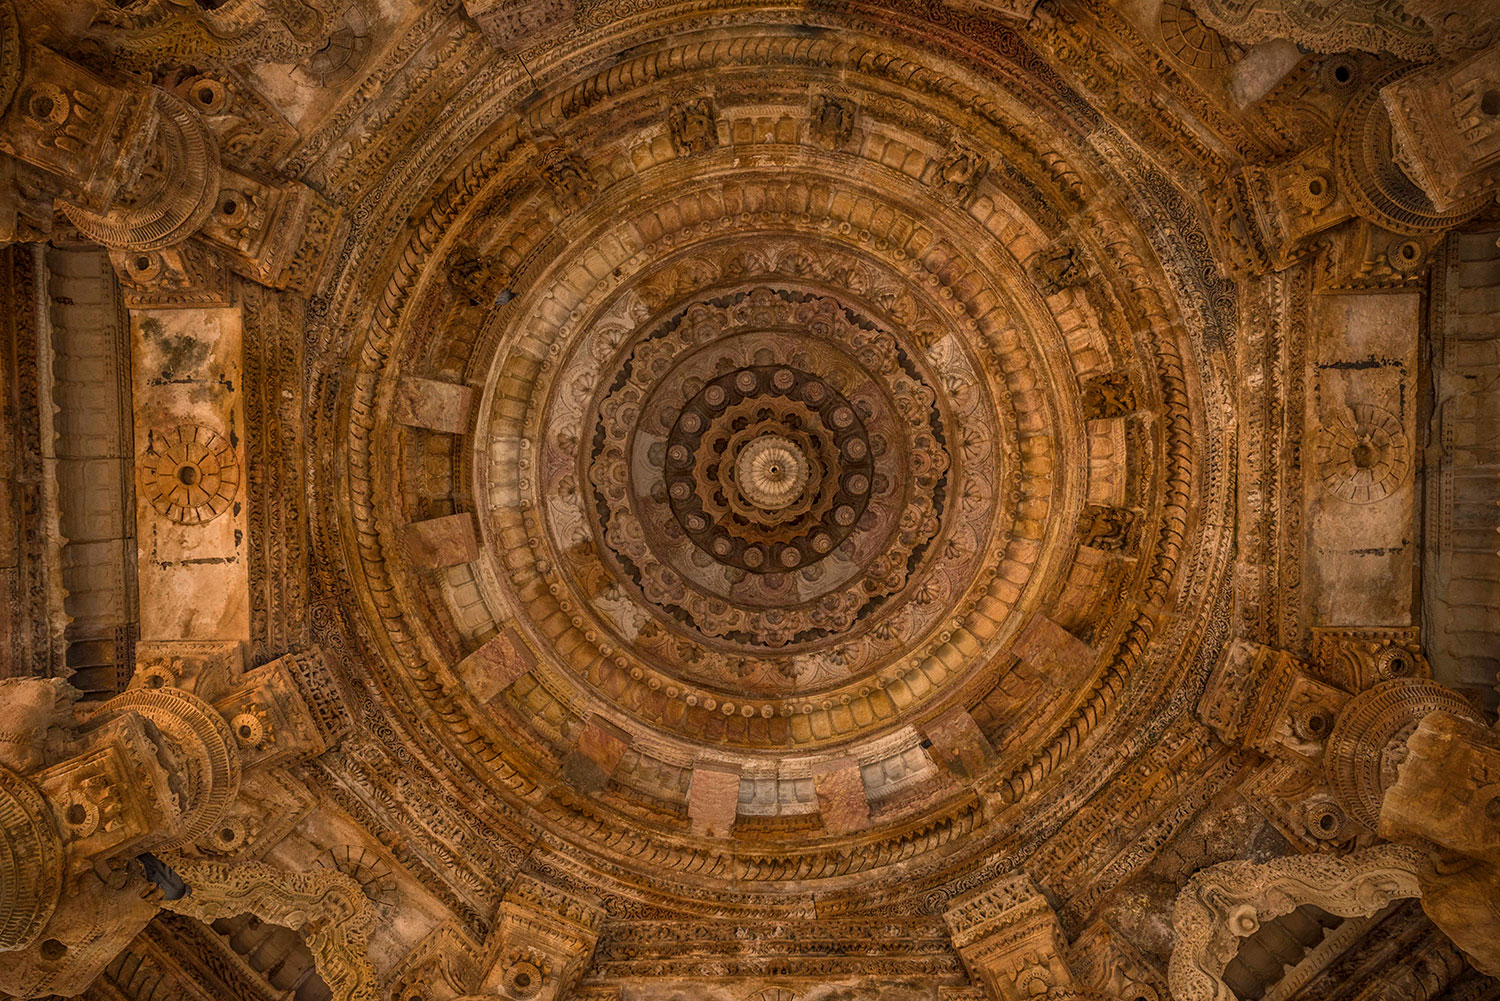 The carved ceiling of the Sabha Mandap at Modhera Sun Temple. The temple is aligned with sunrise on solstices and equinoxes, and with the passage of the Sun overhead during the summer solstice. During sunrise on the spring and autumn equinox, it is believed rays of light would pass through the Sabha Mandap and illuminate a sacred idol in the temple complex beyond.